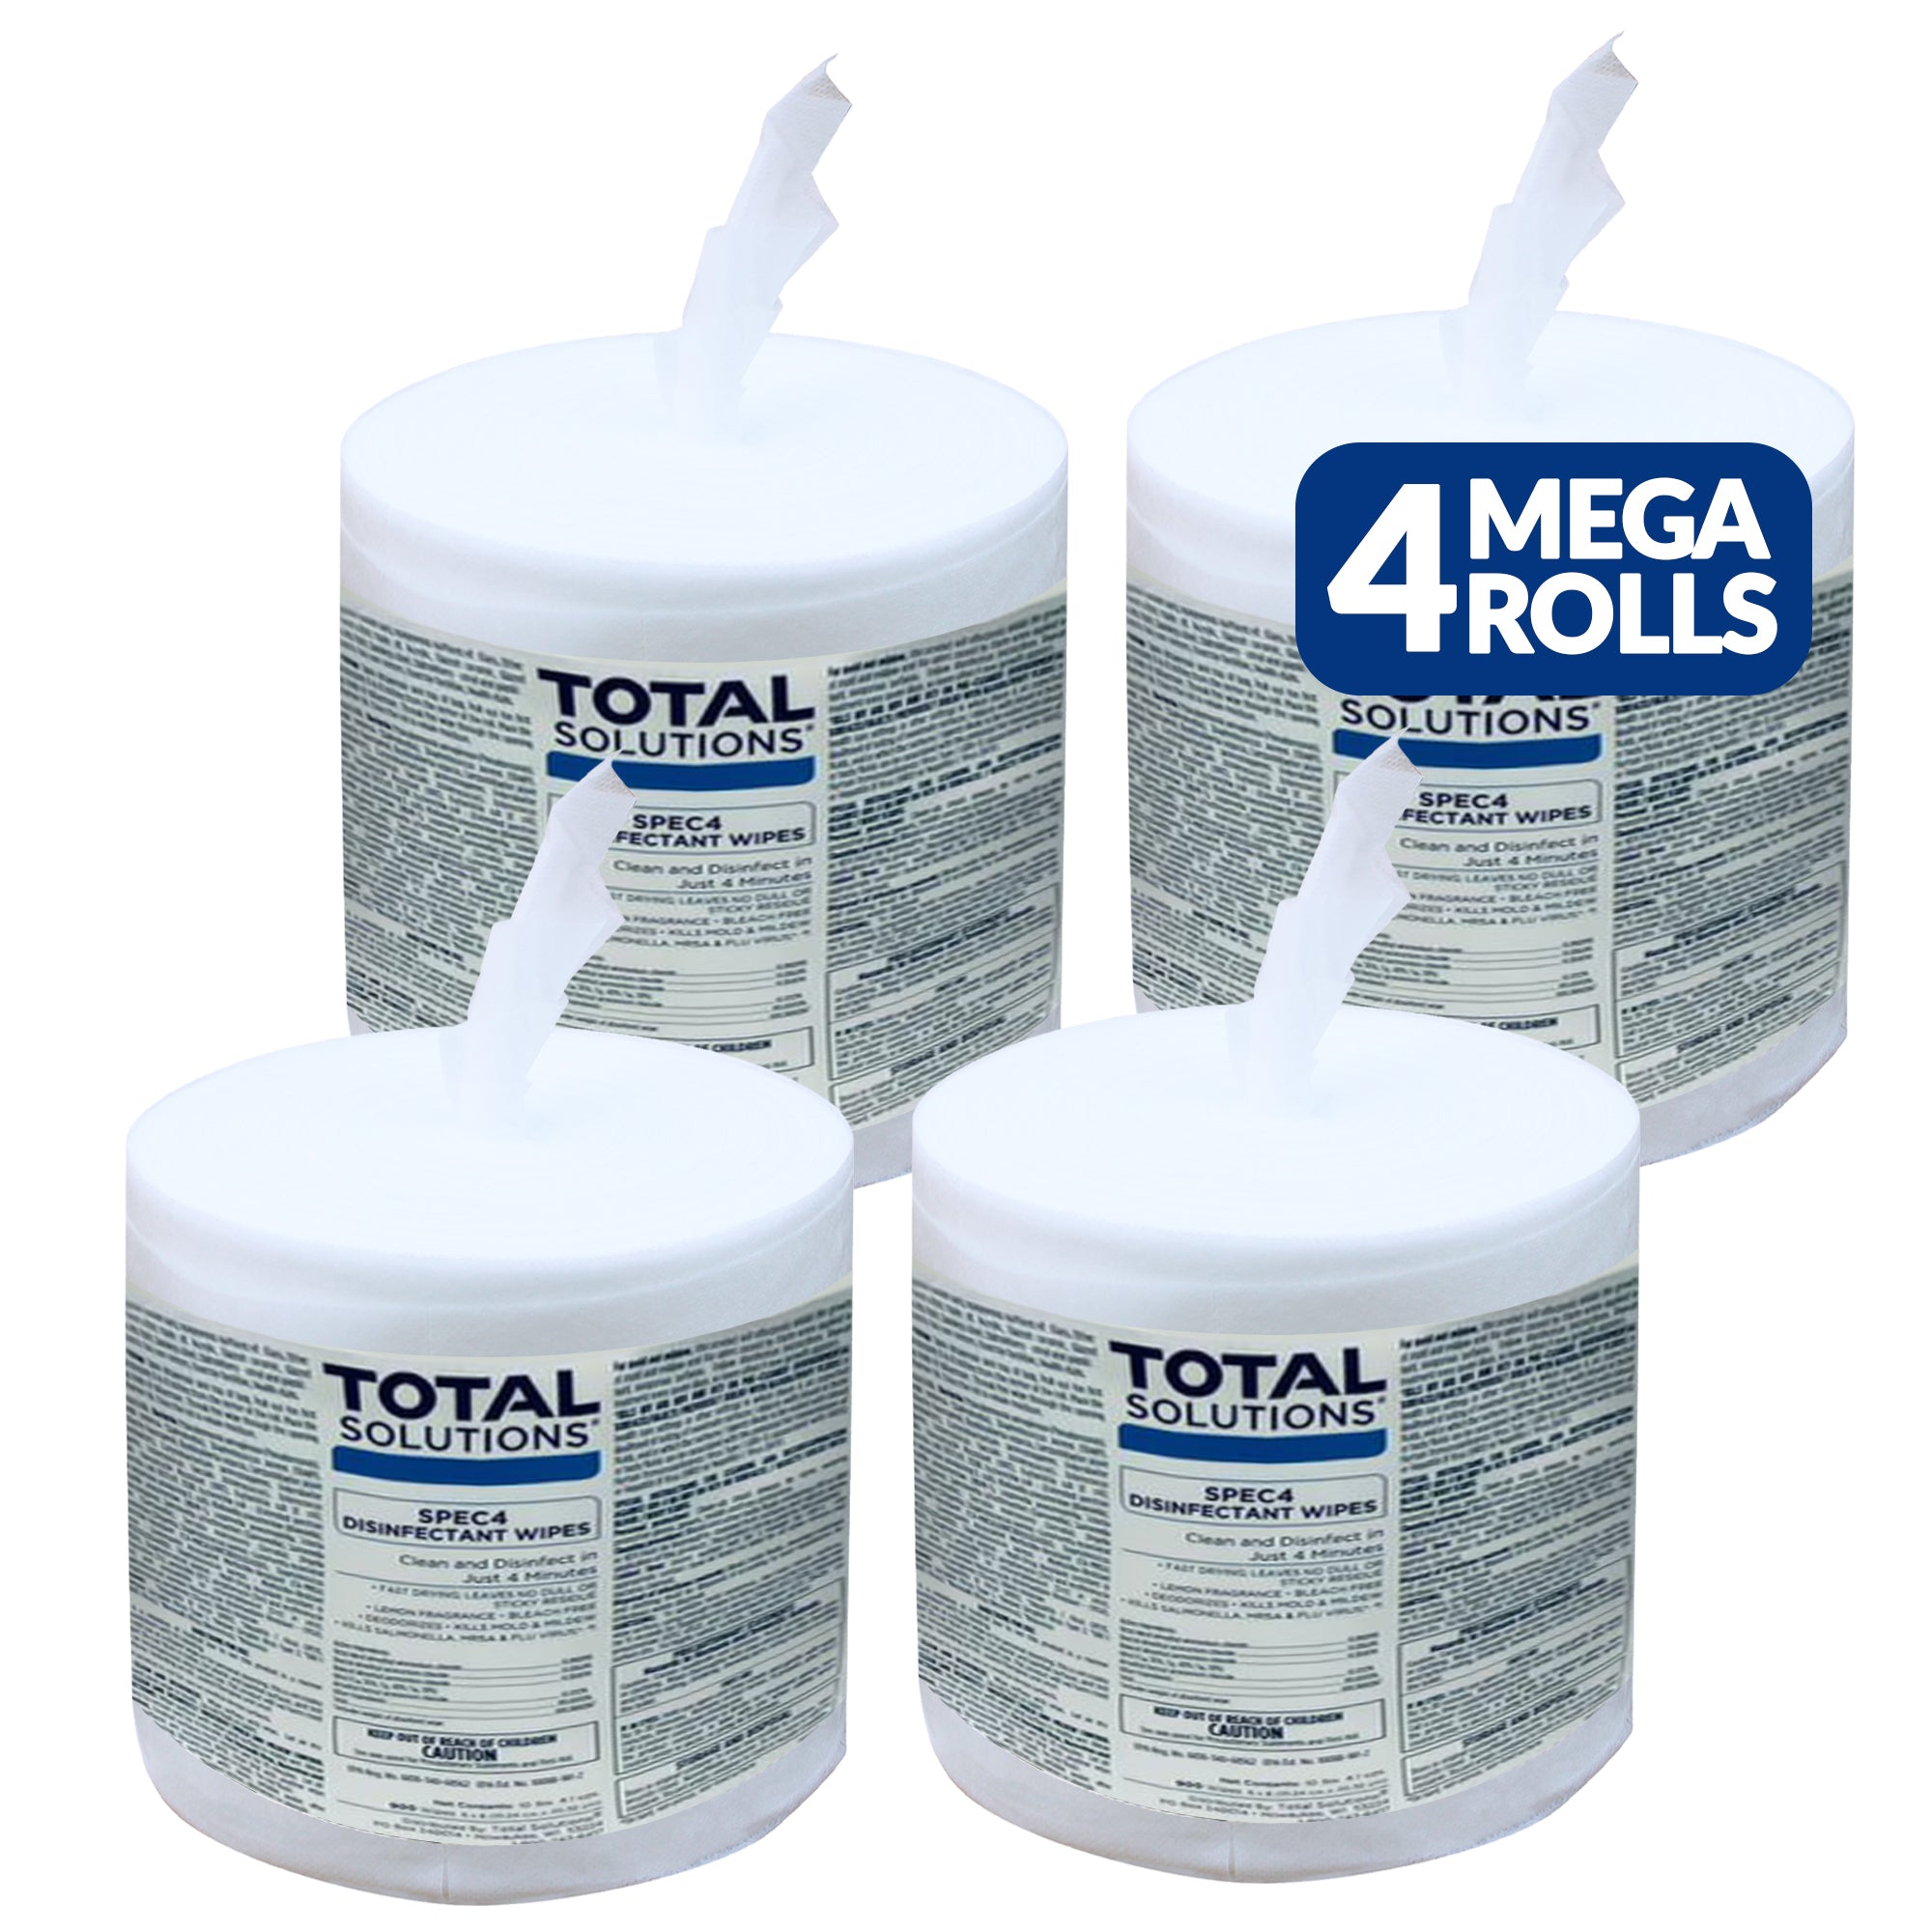 Total Solutions Hospital Grade Disinfecting Wipes: 3600 Wipes (8" x 6"): 4 Refill Mega Rolls - EPA Registered